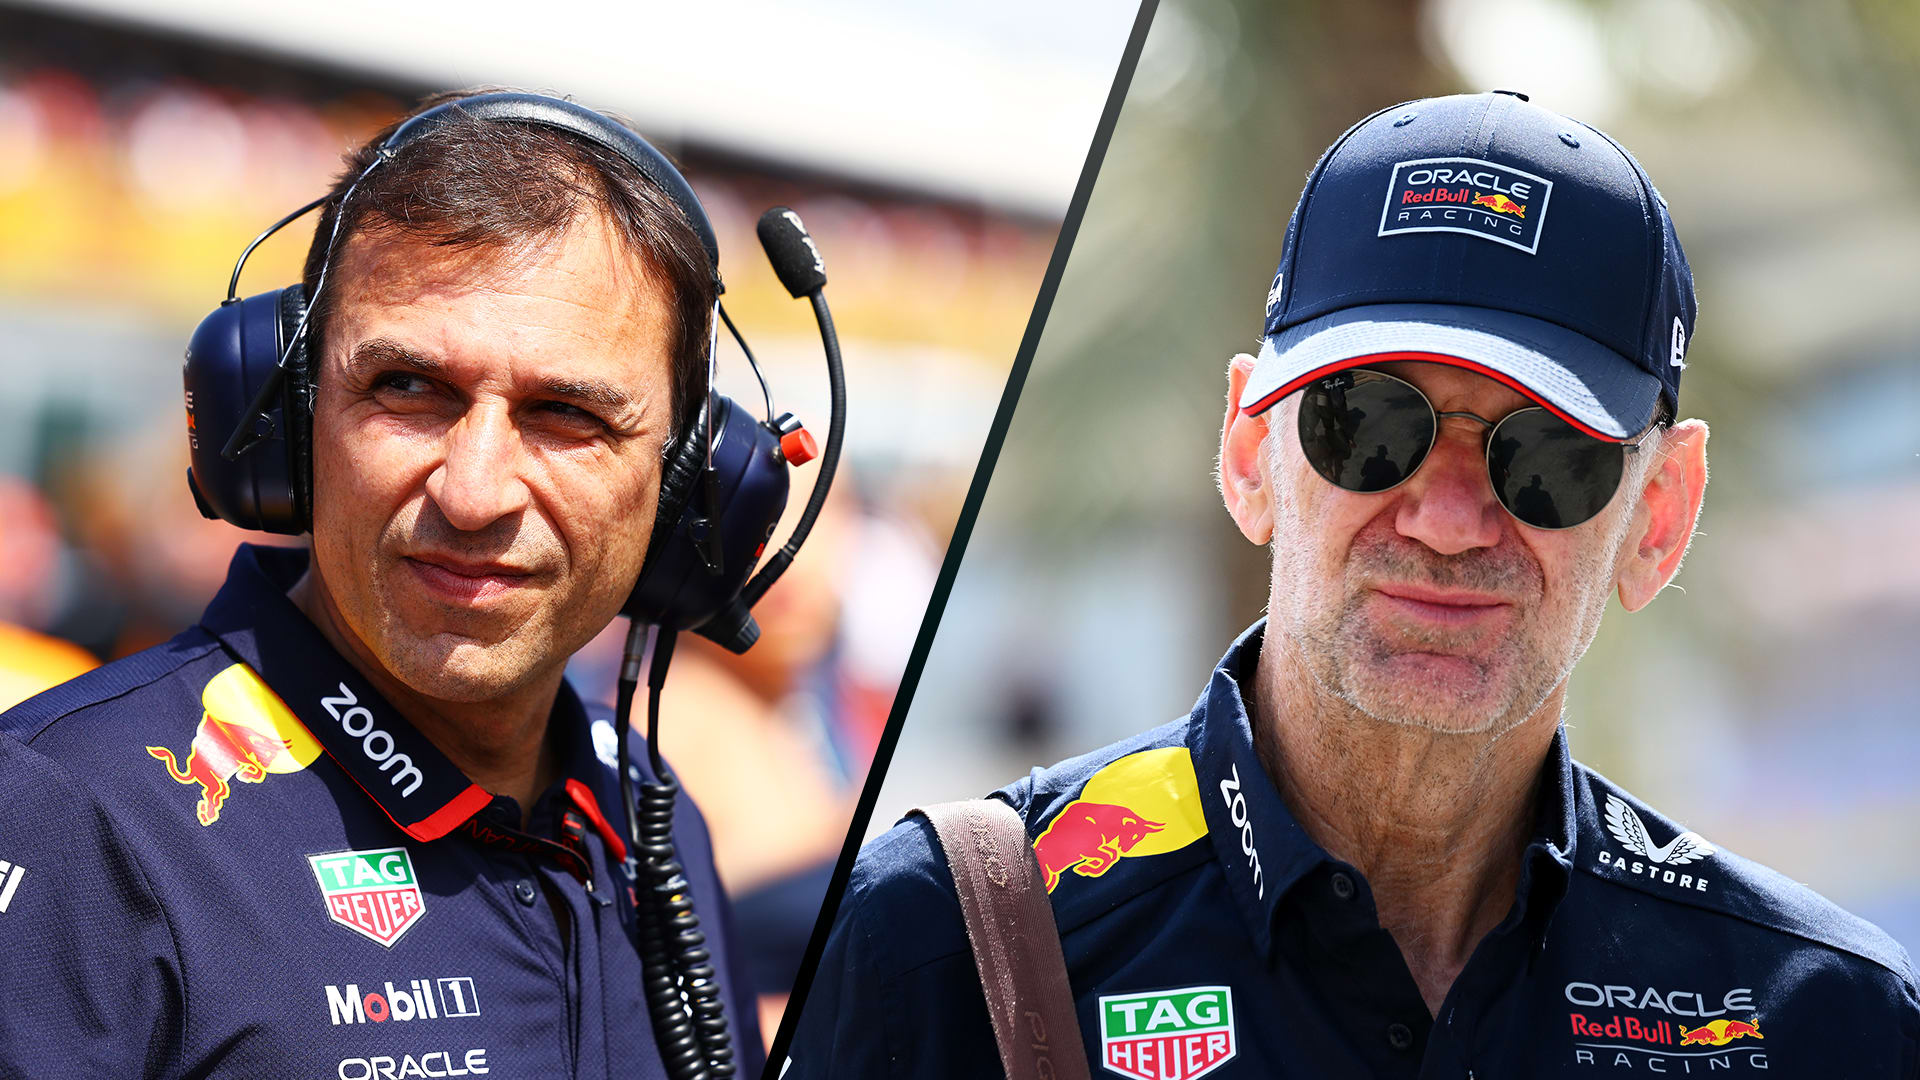 Wache gives his take on Newey’s impending departure from Red Bull as 2026 rule changes loom